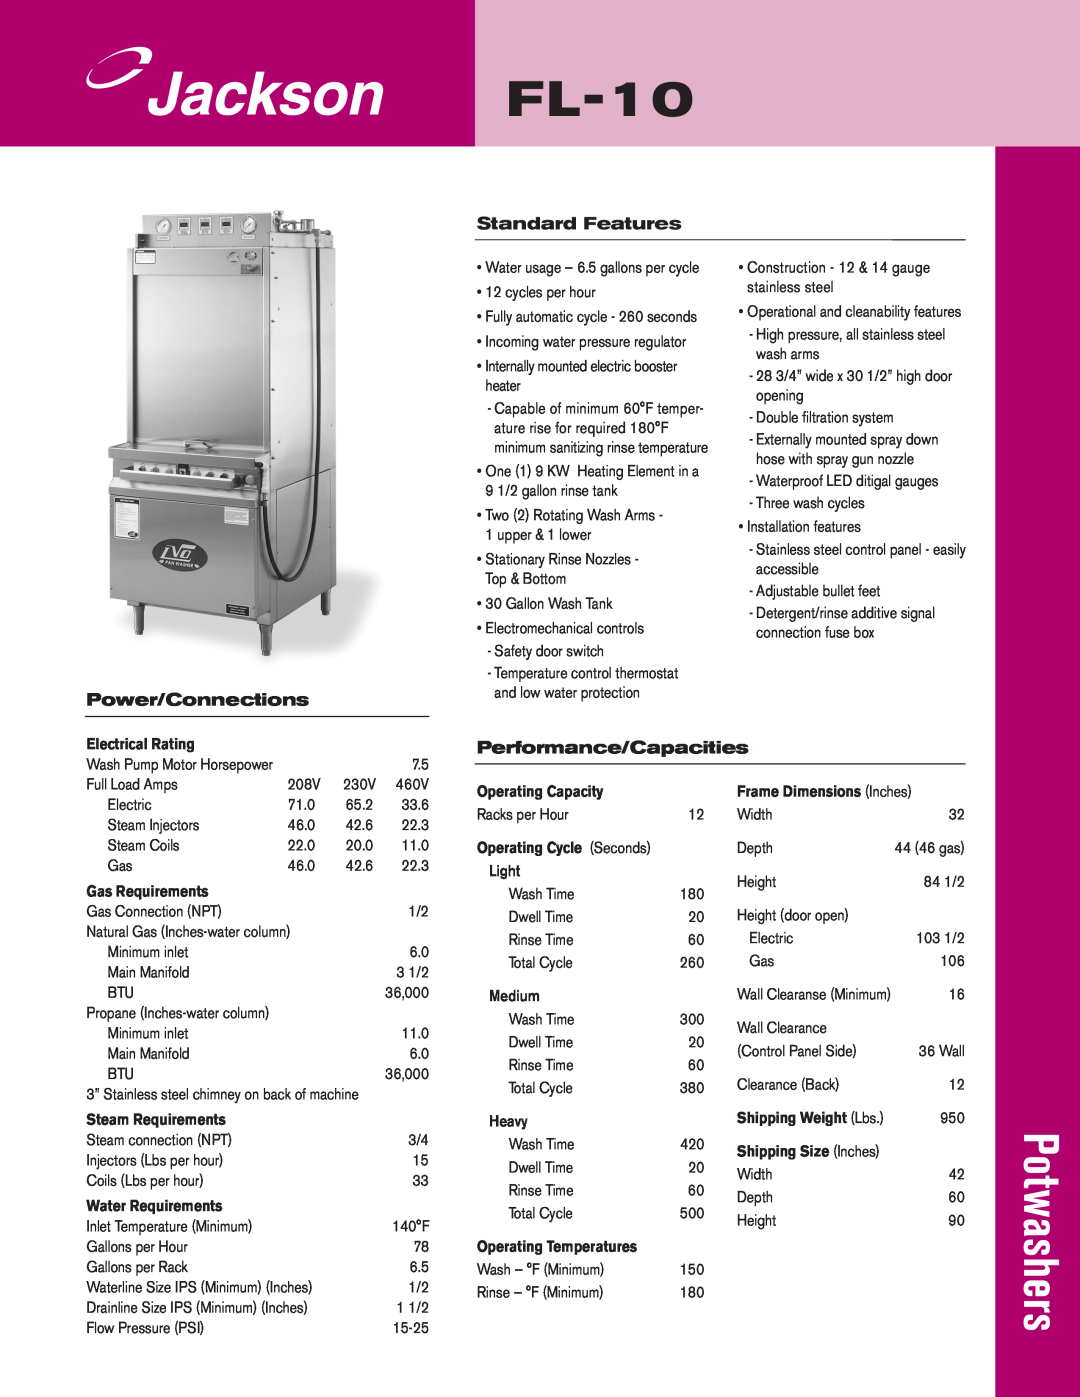 Jackson FL-10 dimensions Standard Features, Power/Connections, Performance/Capacities, Electrical Rating, Gas Requirements 